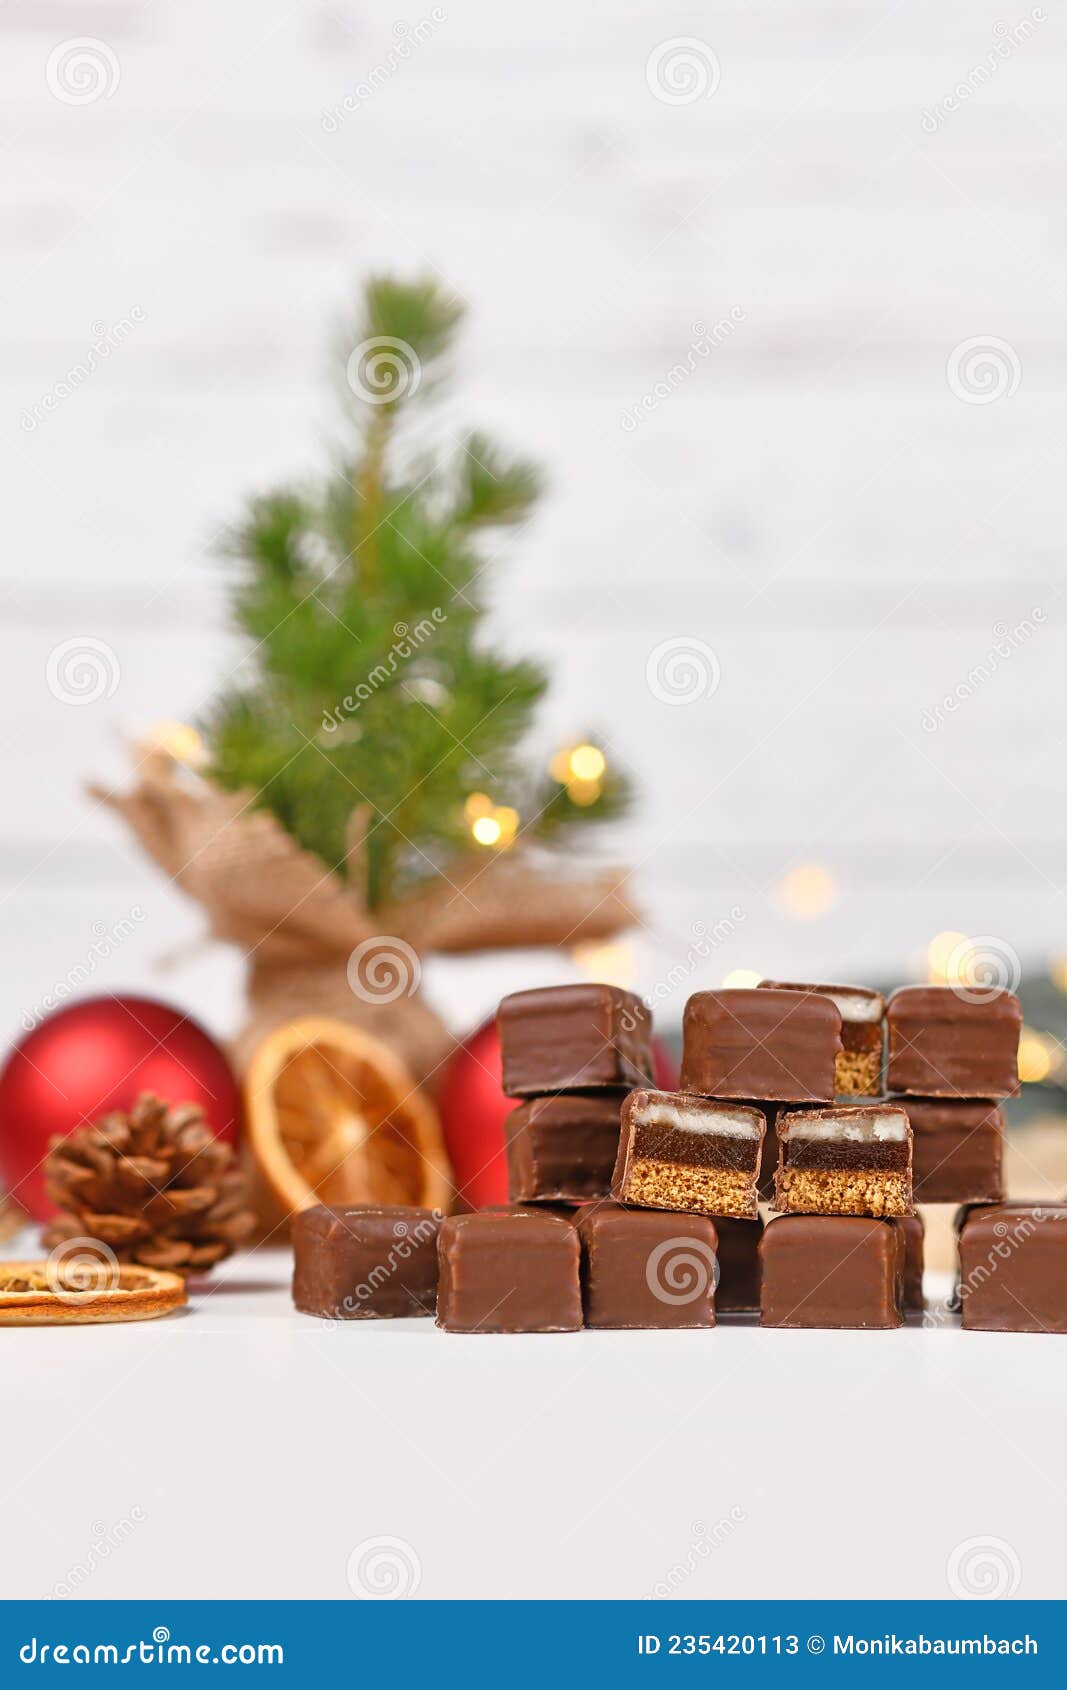 German Christmas Candy Called `Dominosteine` Consisting of Gingerbread ...